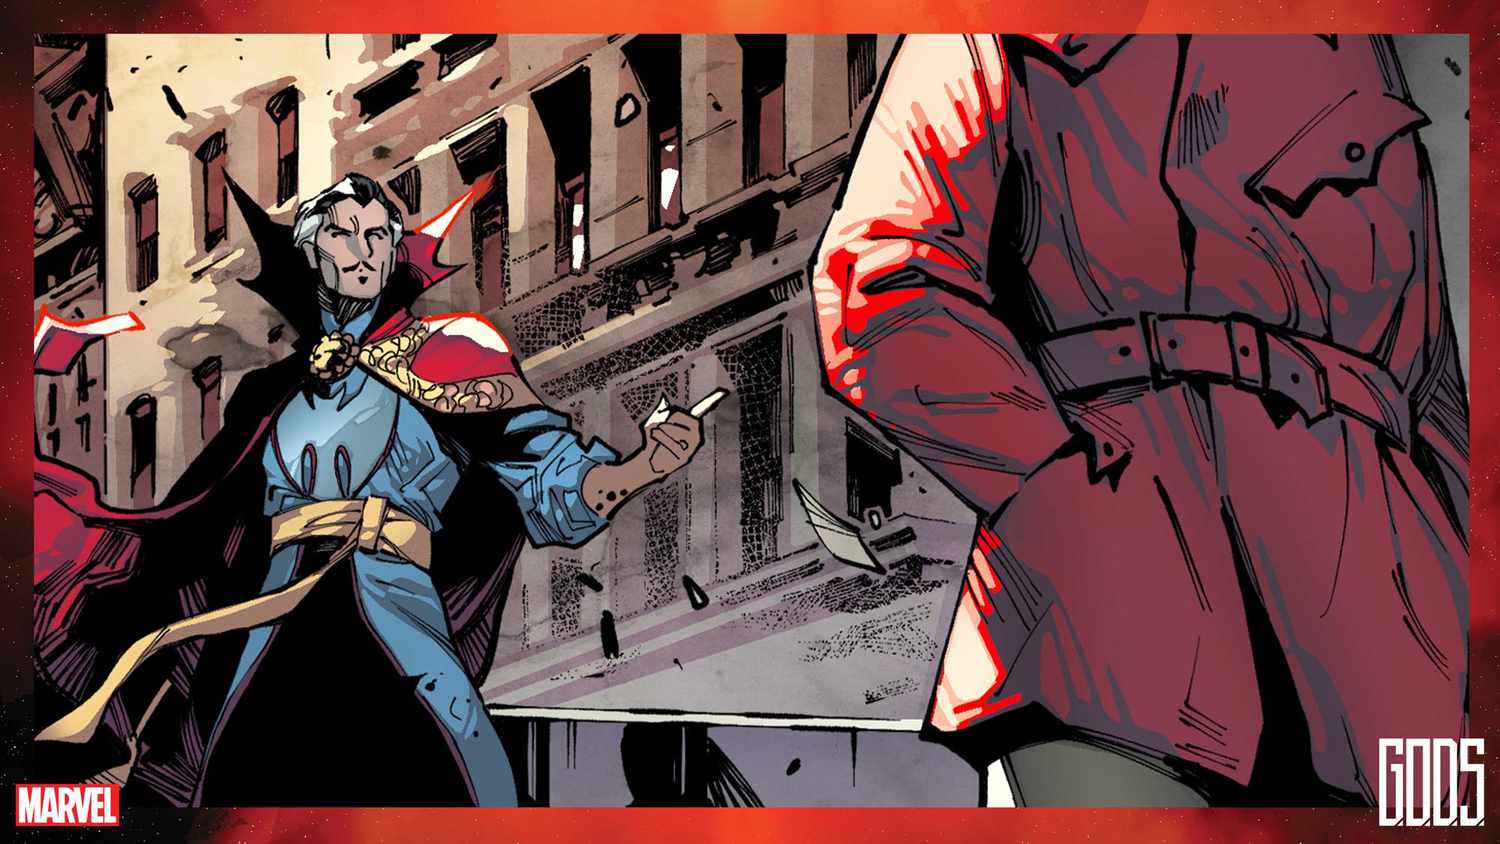 Doctor Strange confronts Wyn in Marvel's 'G.O.D.S.' by Jonathan Hickman and Valerio Schiti